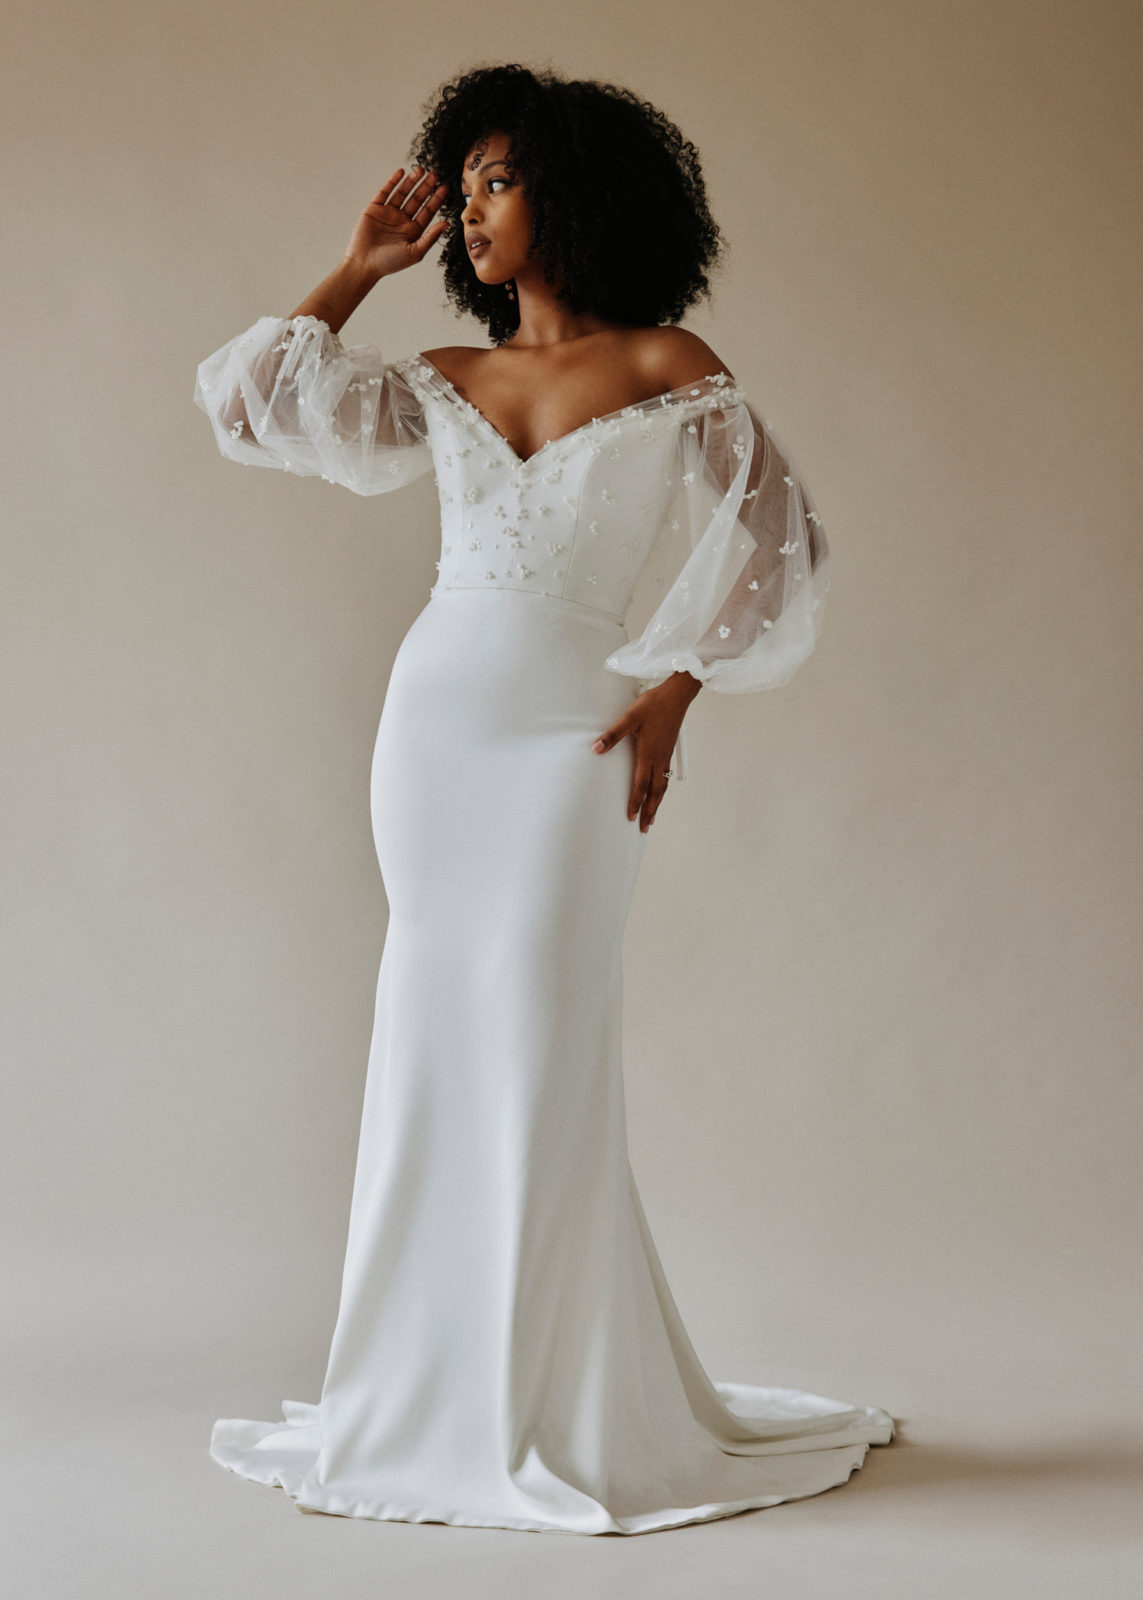 Romantic and modern bridal look from Canadian designer Laudae